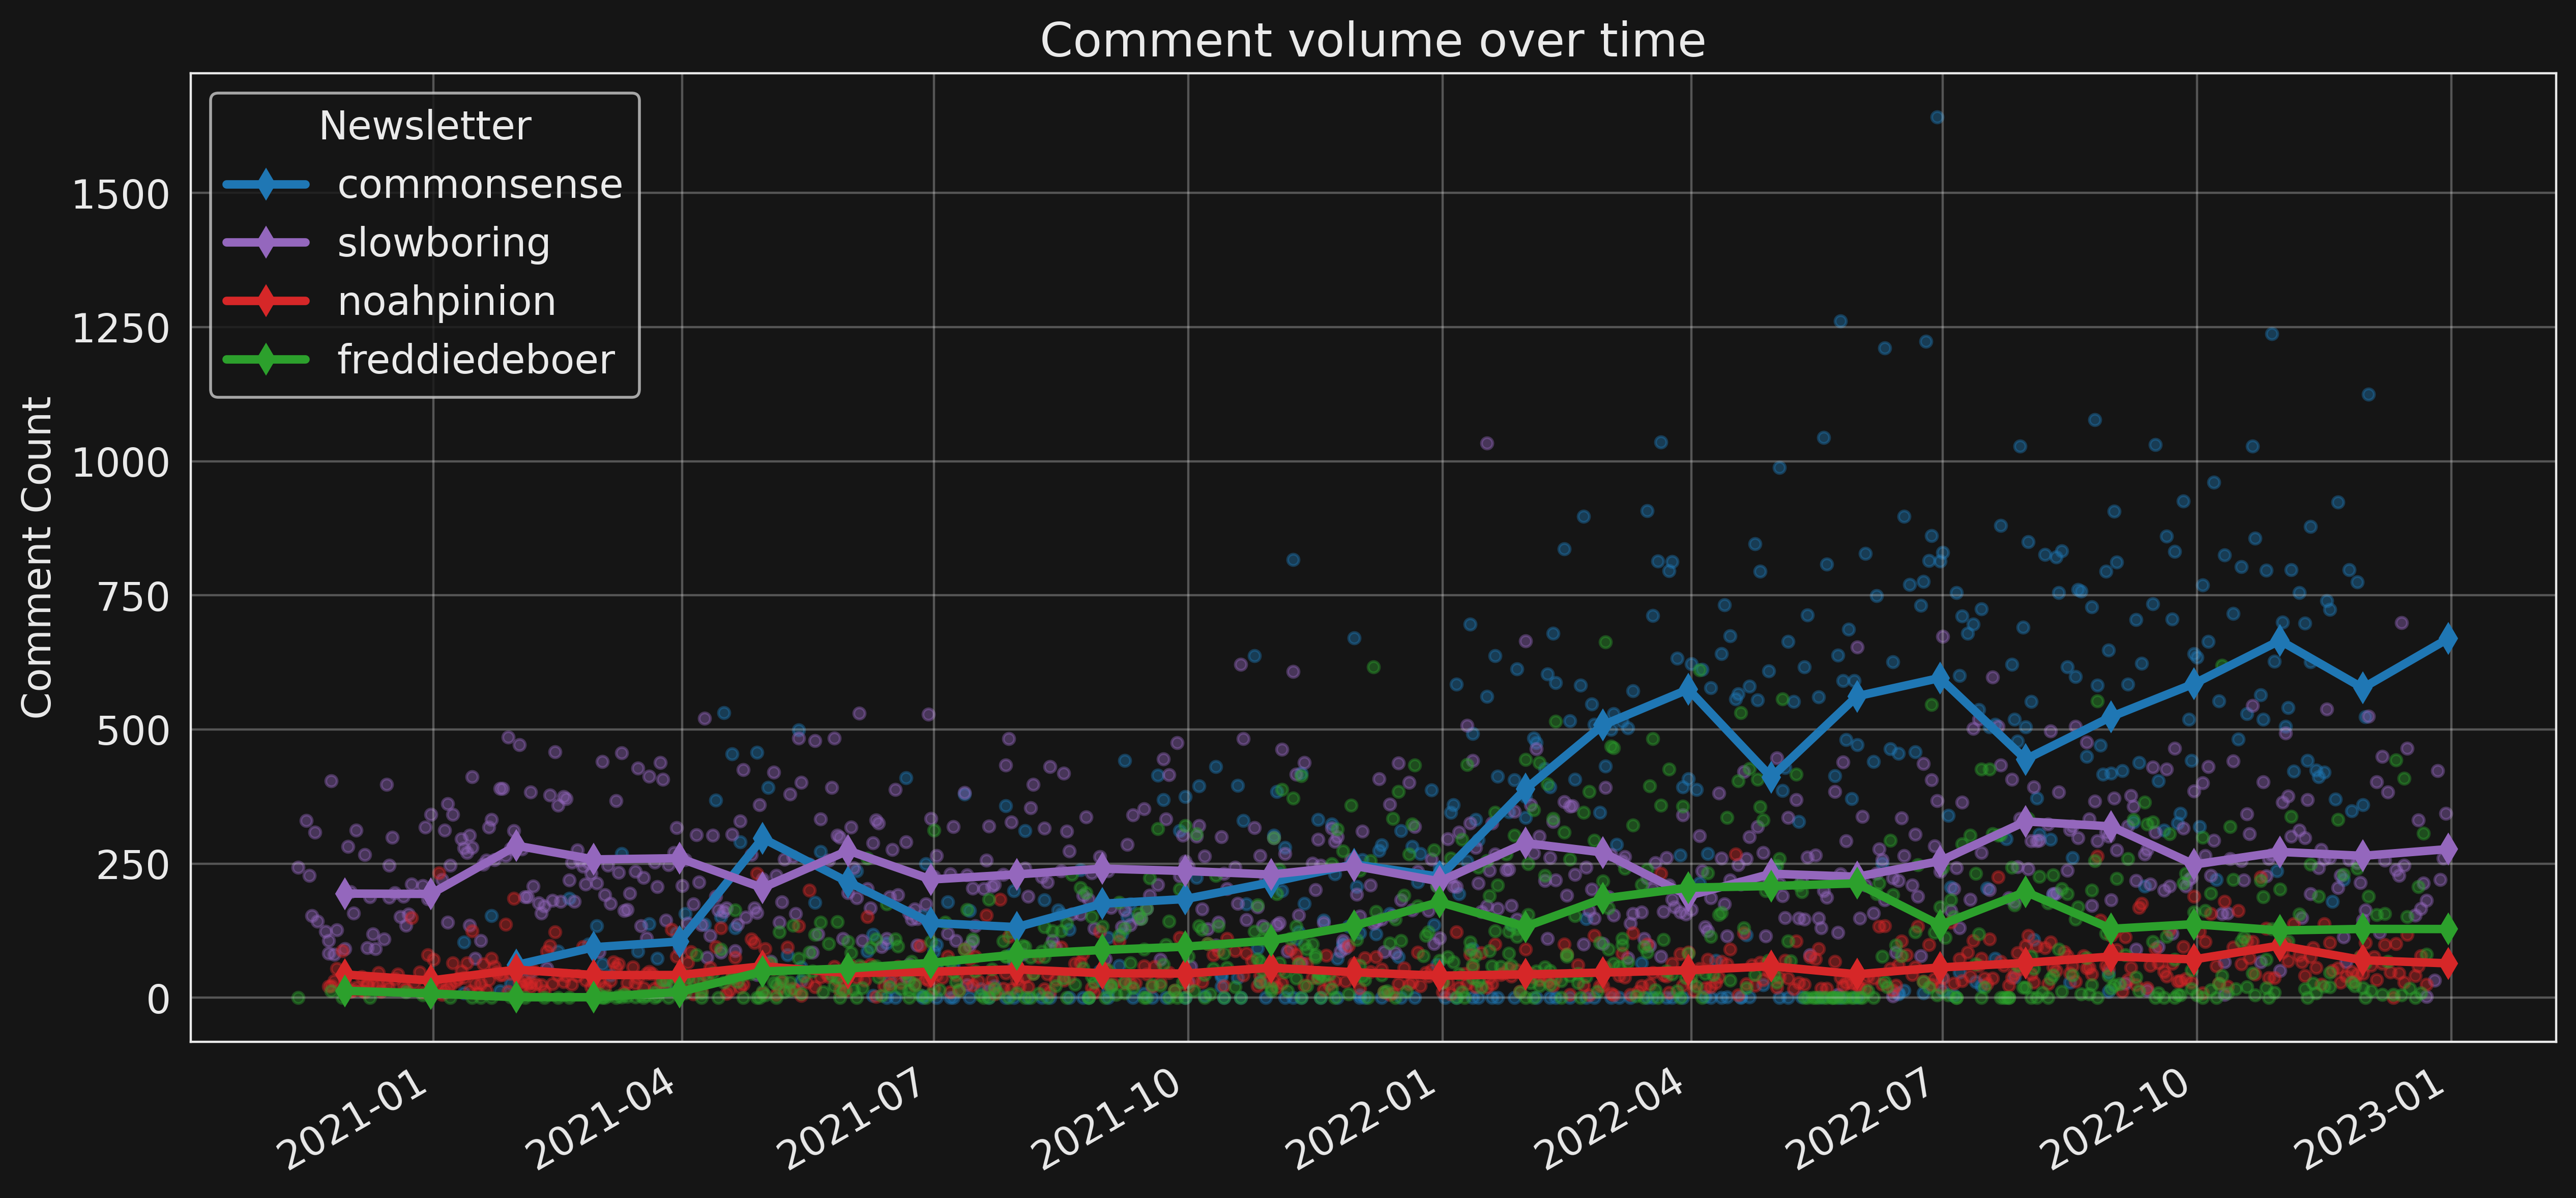 Comment volume over time